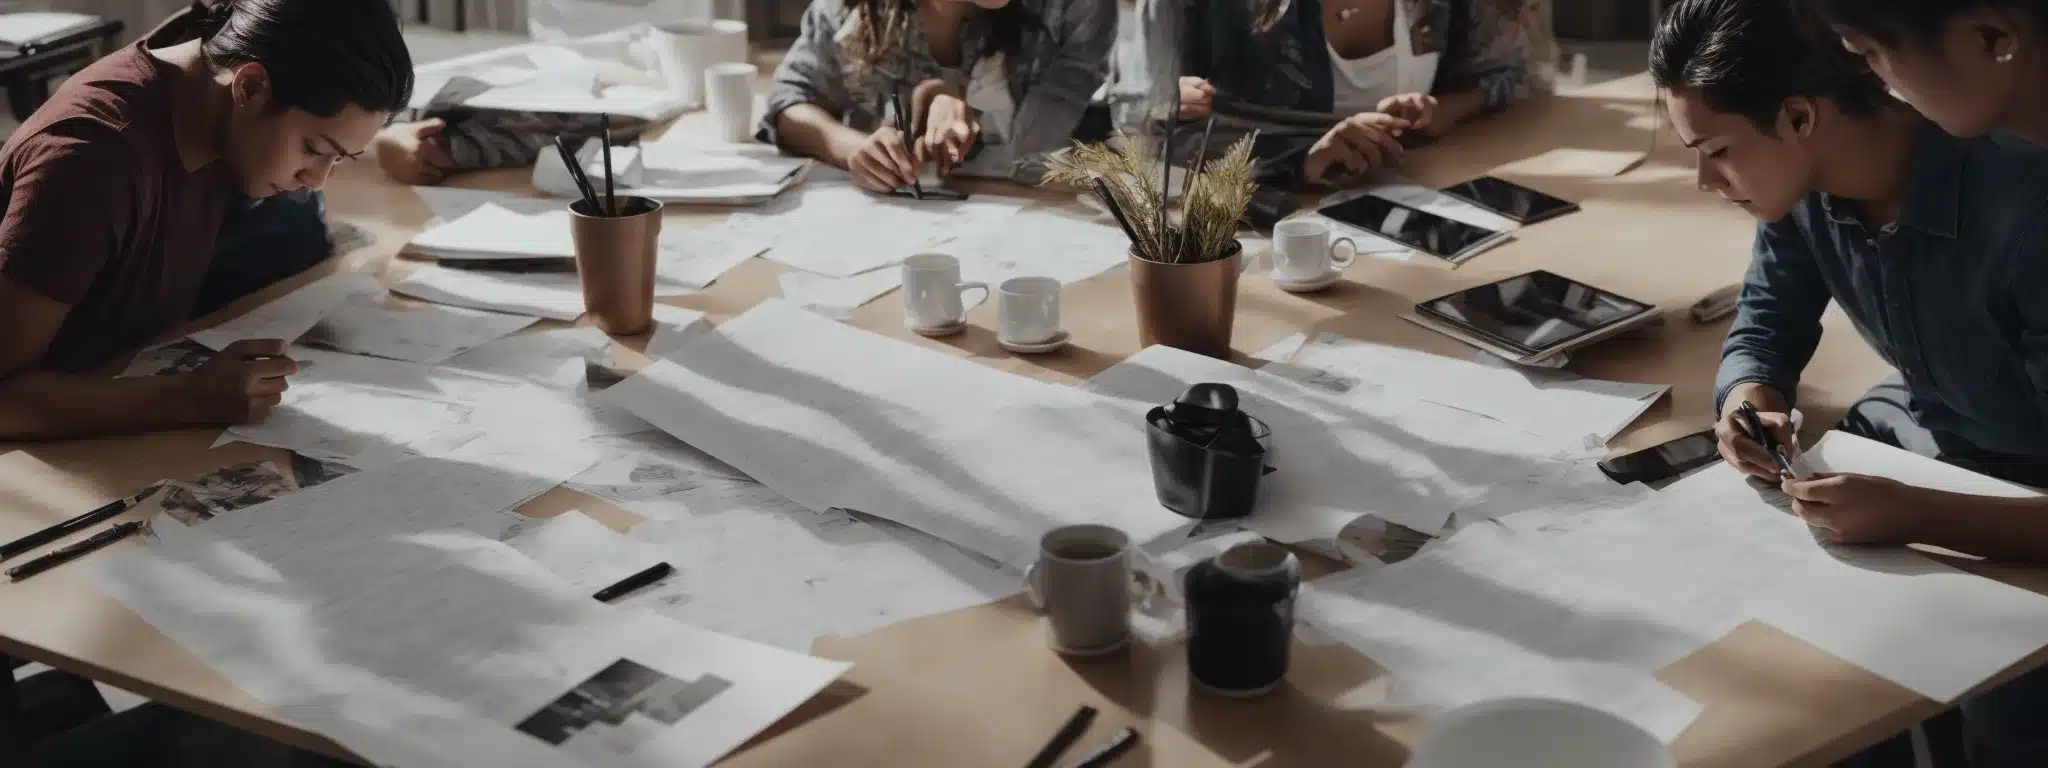 A Design Team Collaborates Around A Large Table, Sketching And Discussing Layouts On Papers And Tablets, Embodying A Seamless Blend Of Technology And Creativity.